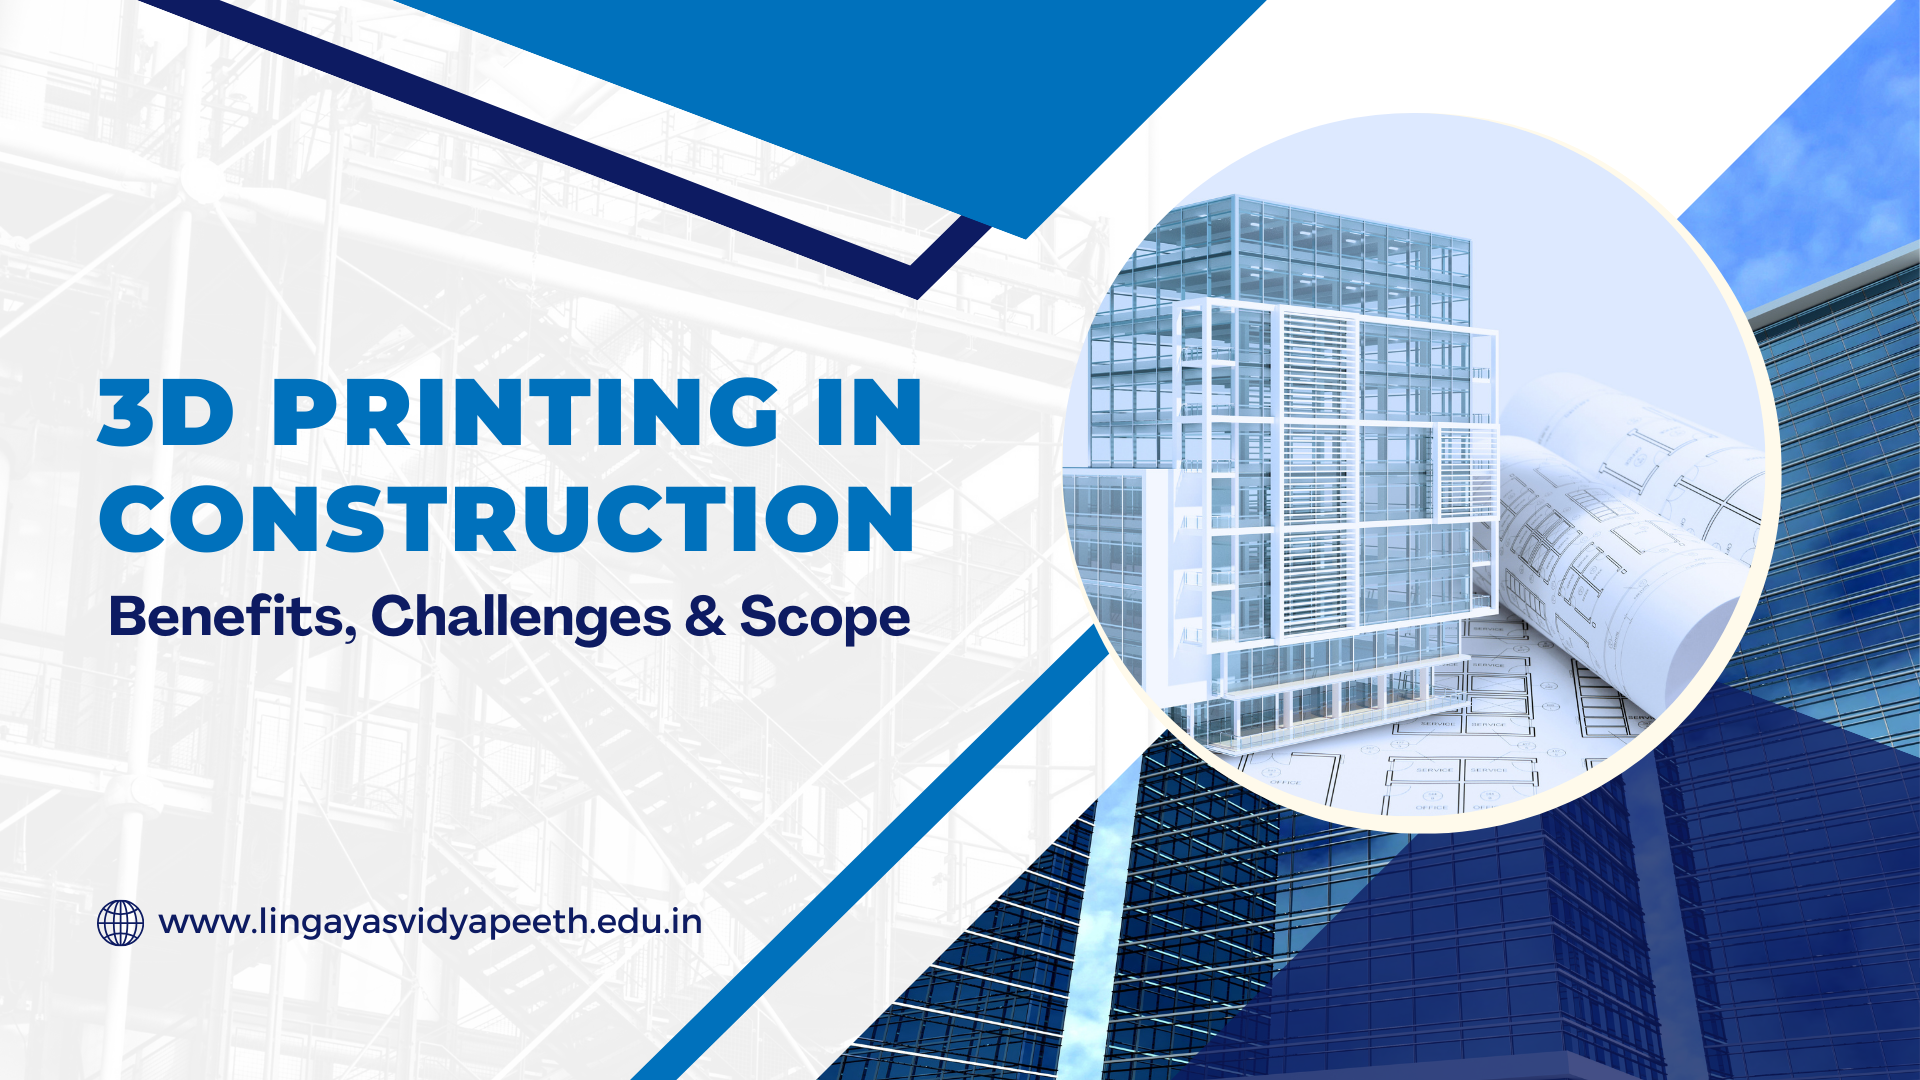 3D Printing in Construction: Benefits, Challenges & Scope